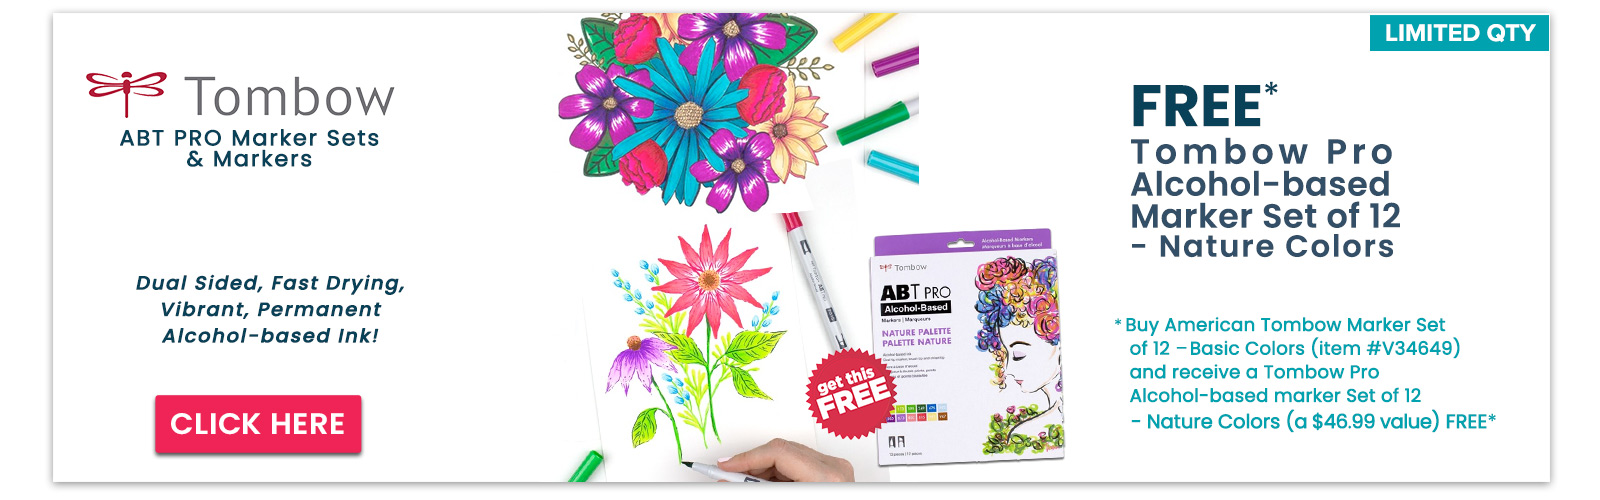 Tombow ABT PRO Marker Sets + Special Offer